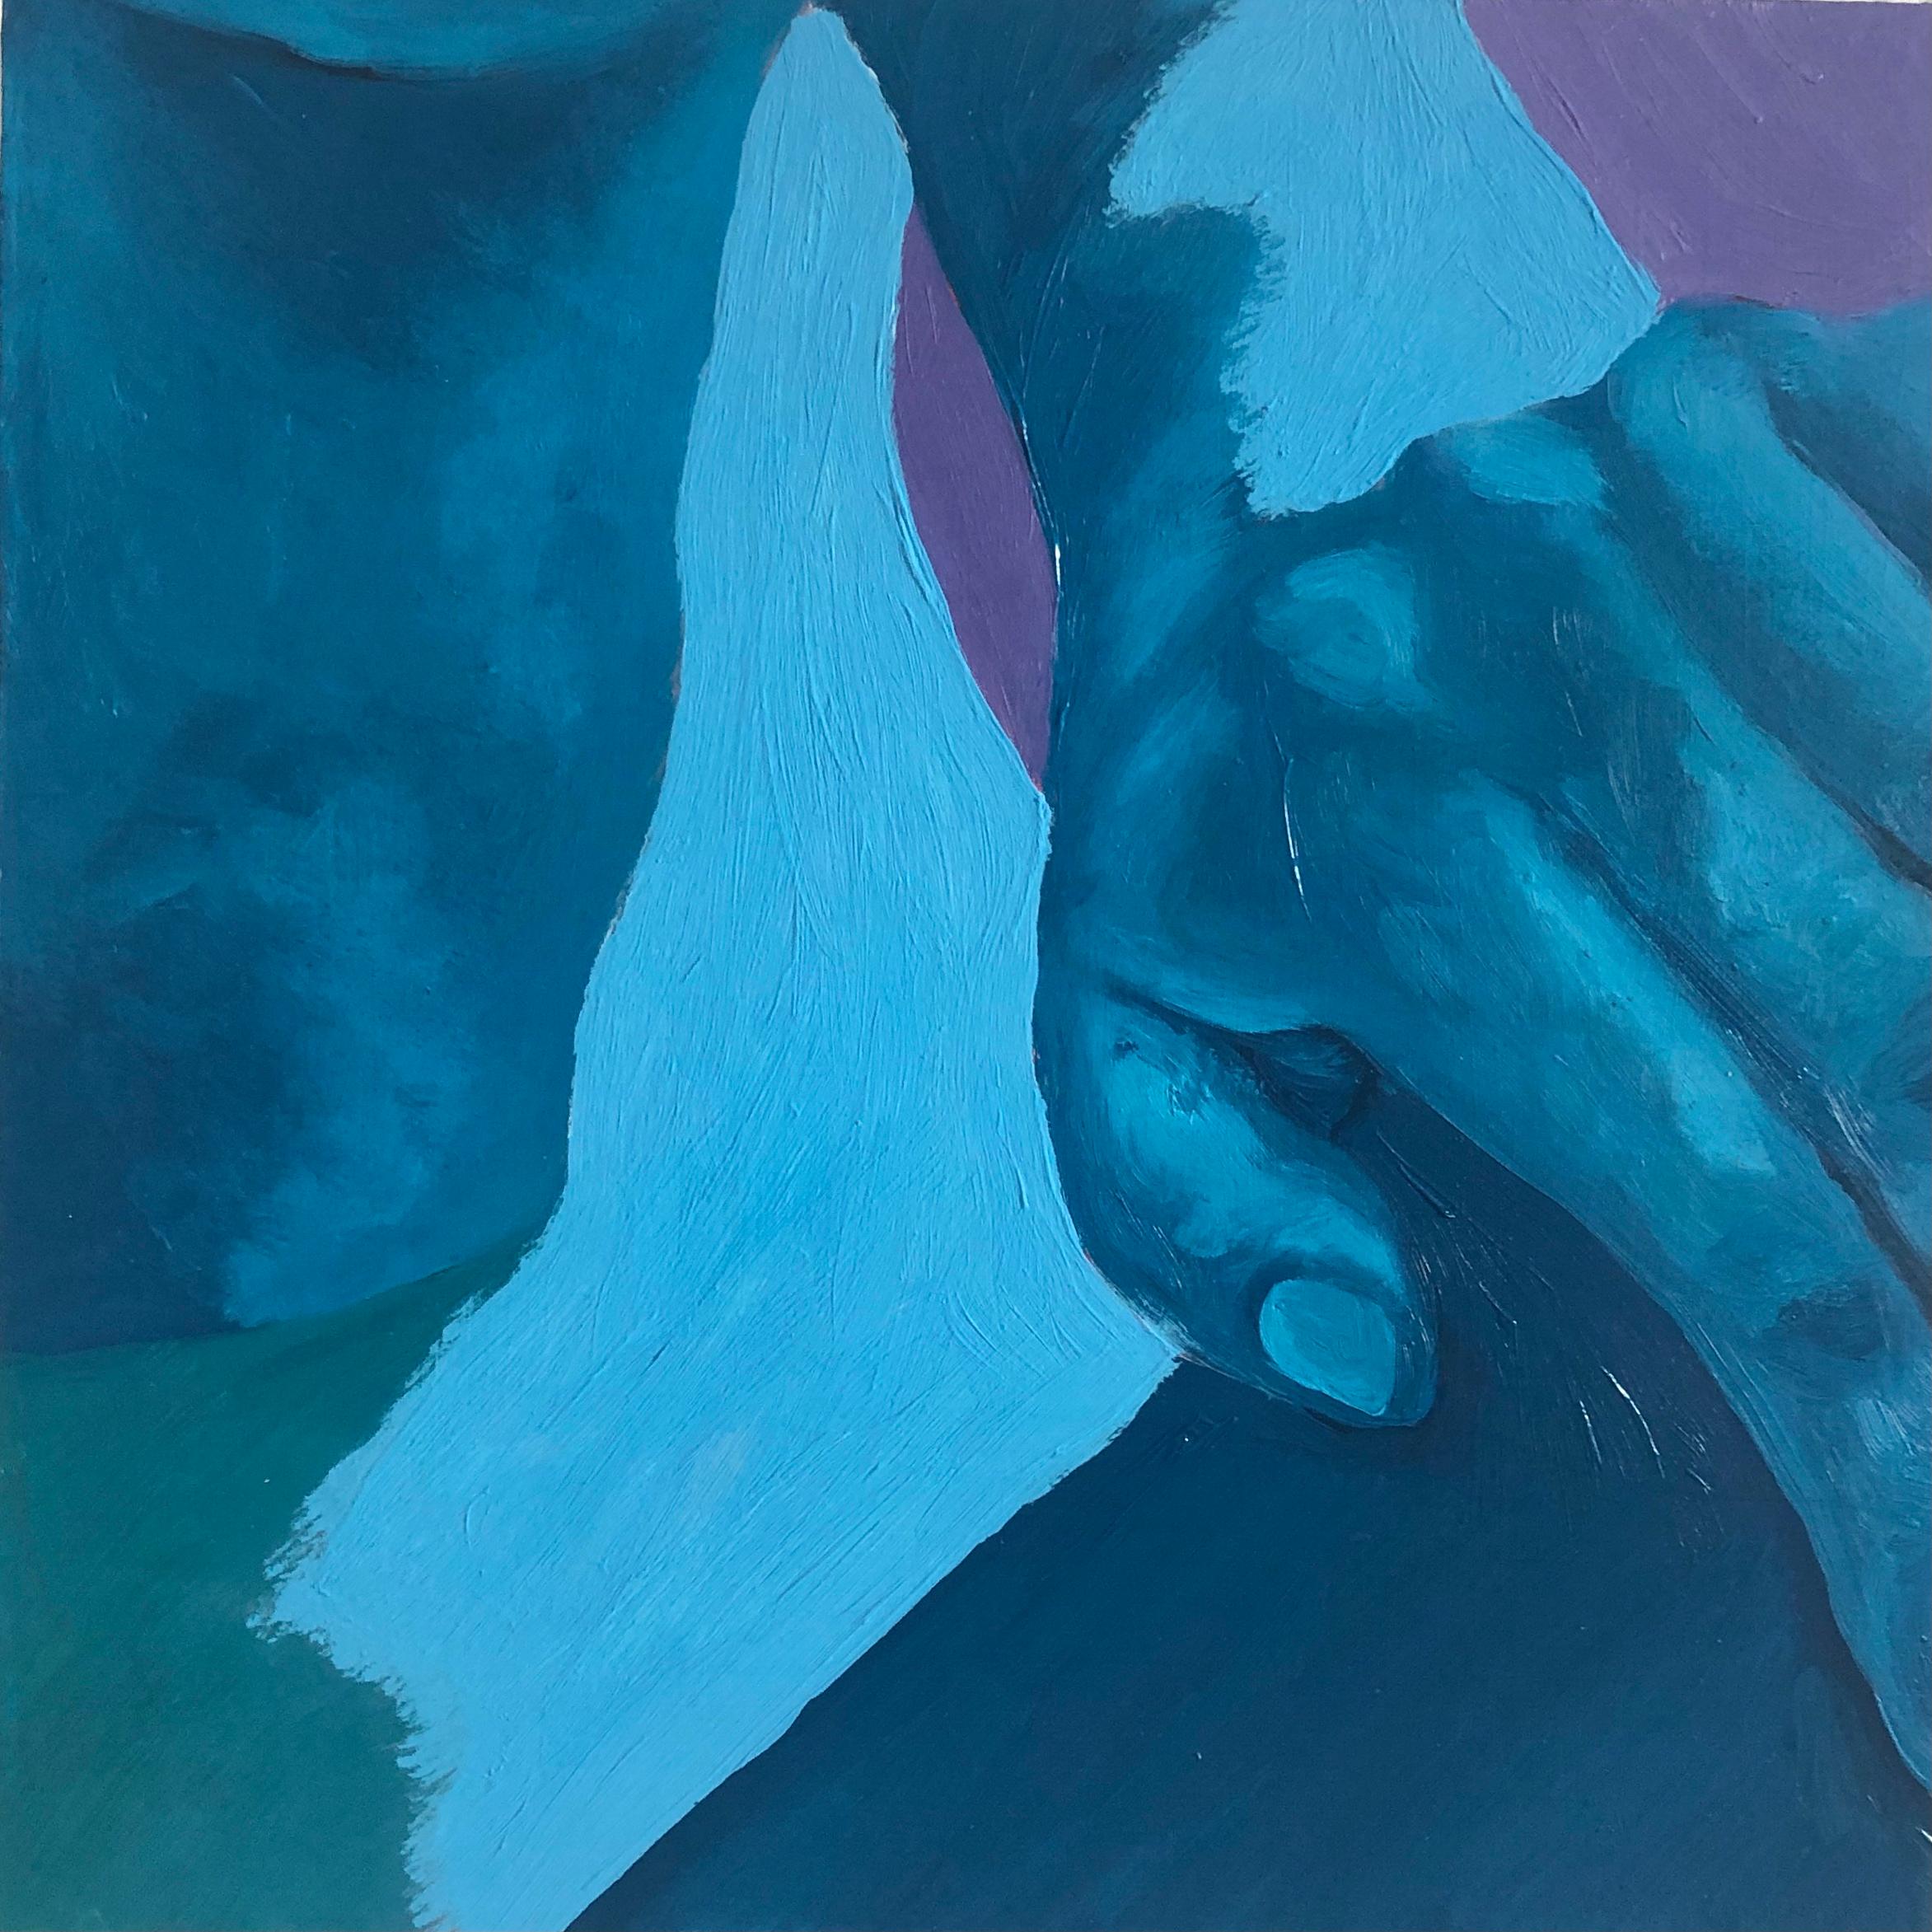 Cold (2020), blue nude oil on wood panel painting, hand and torso, cool tones